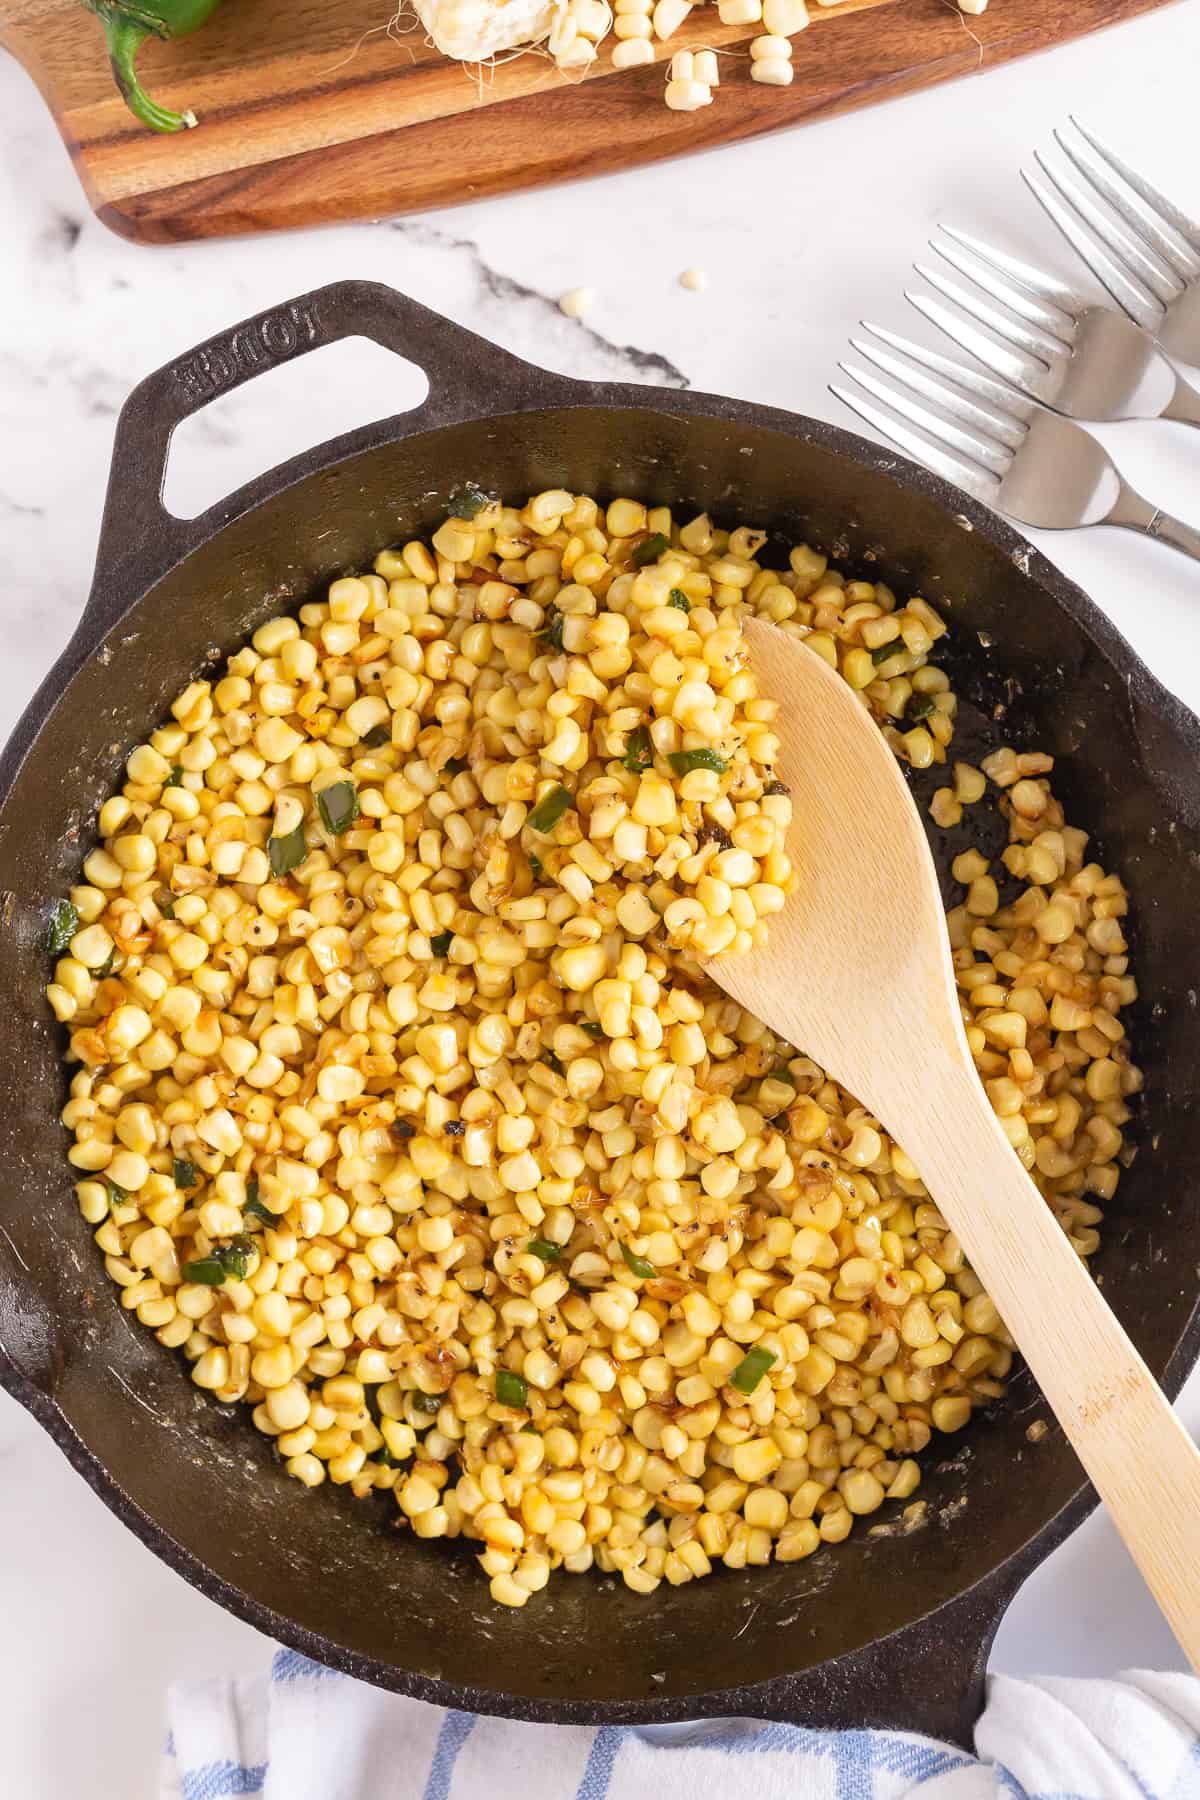 Corn being stirred with a wooden spoon in a cast iron skillet.